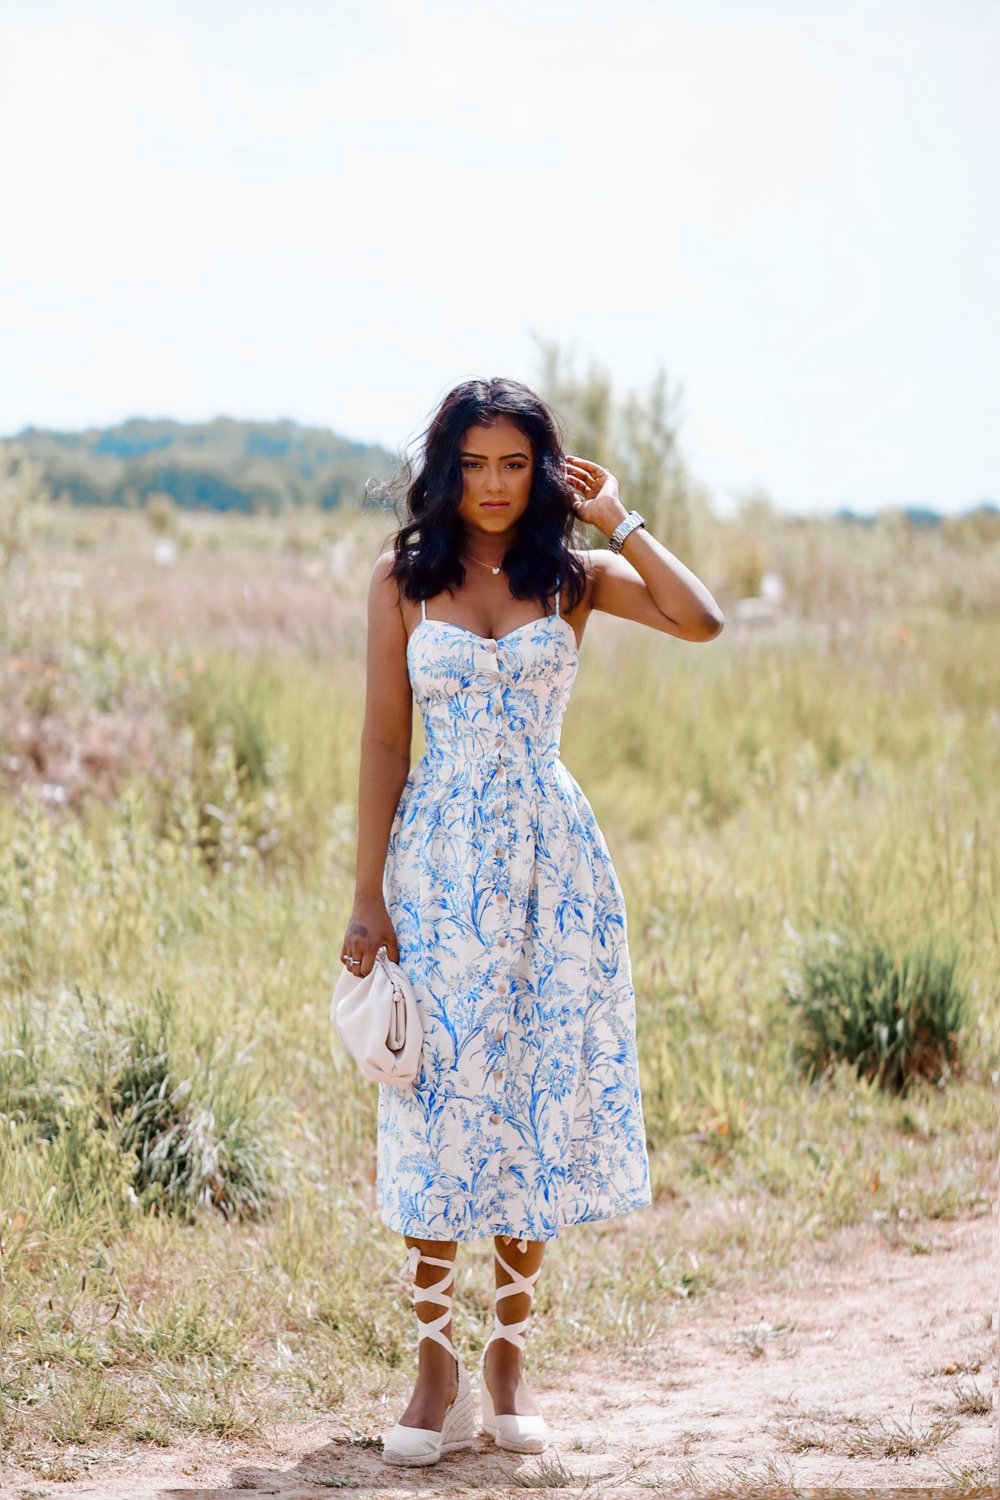 Sachini wearing a white and blue dress in a field 